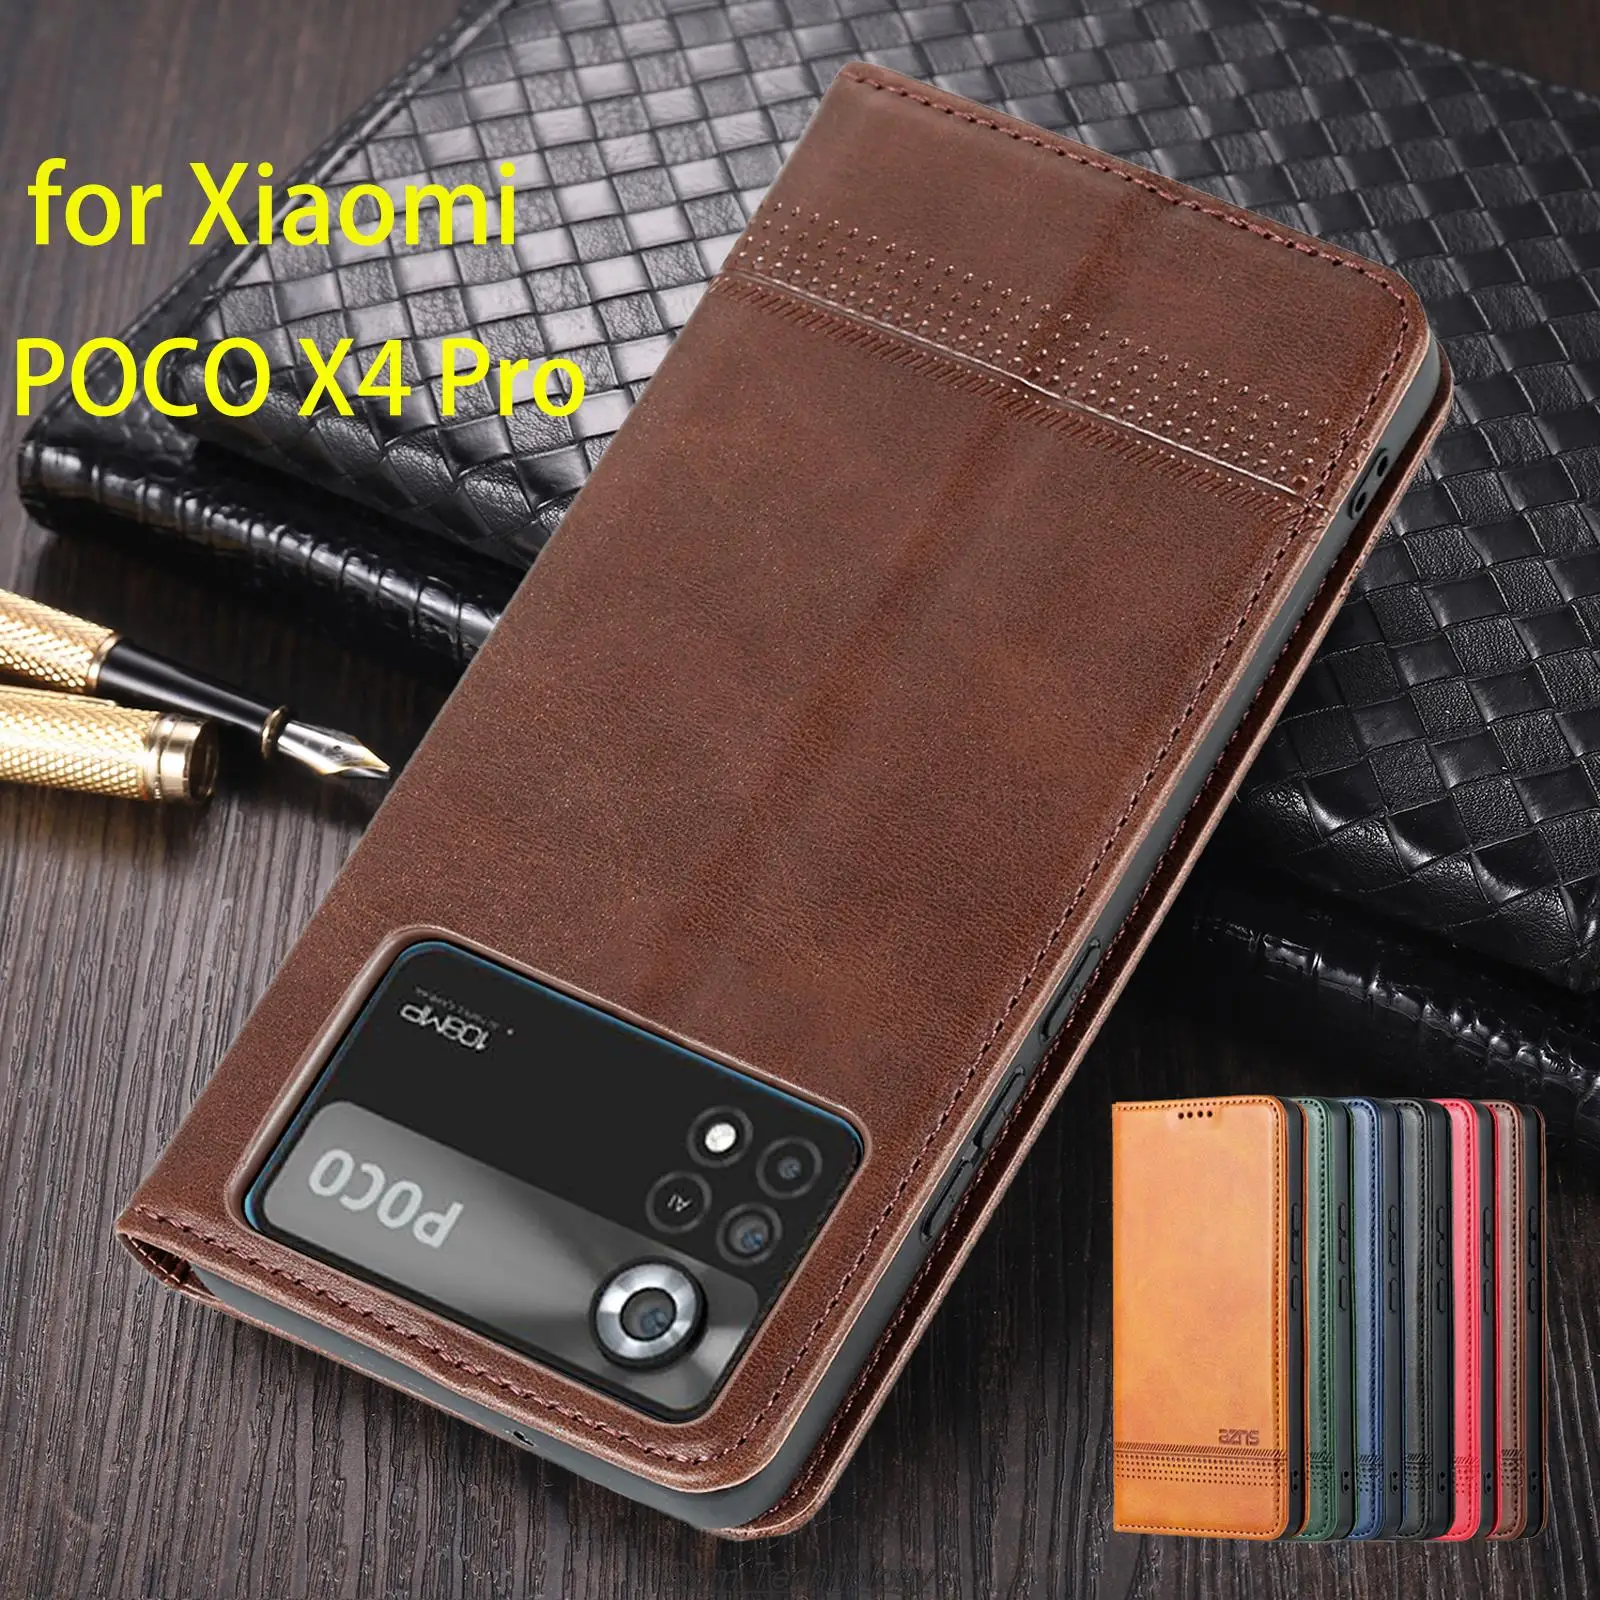 

Deluxe Magnetic Adsorption Leather Fitted Case for Xiaomi POCOPHONE POCO X4 Pro 6.67" Flip Cover Protective Case Fundas Coque